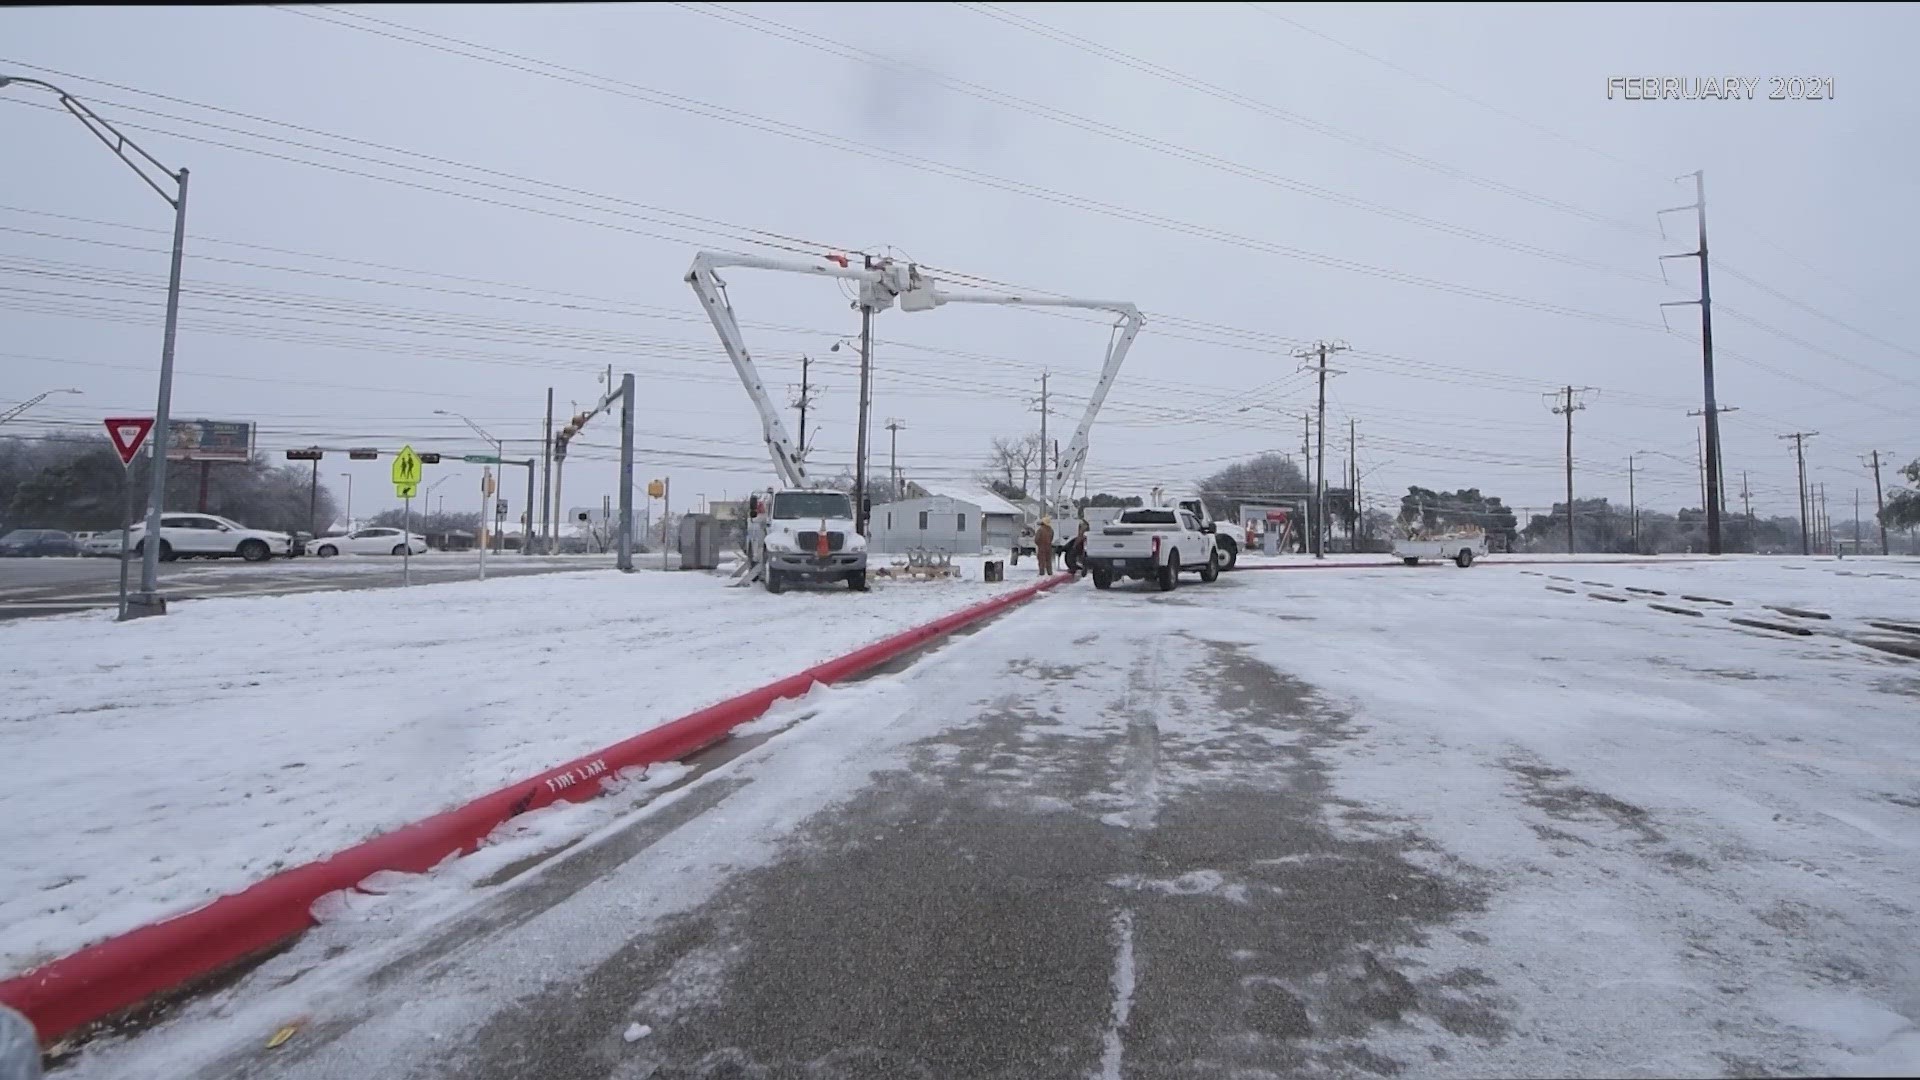 Officials said grid conditions are expected to be normal during an ERCOT Weather Watch.